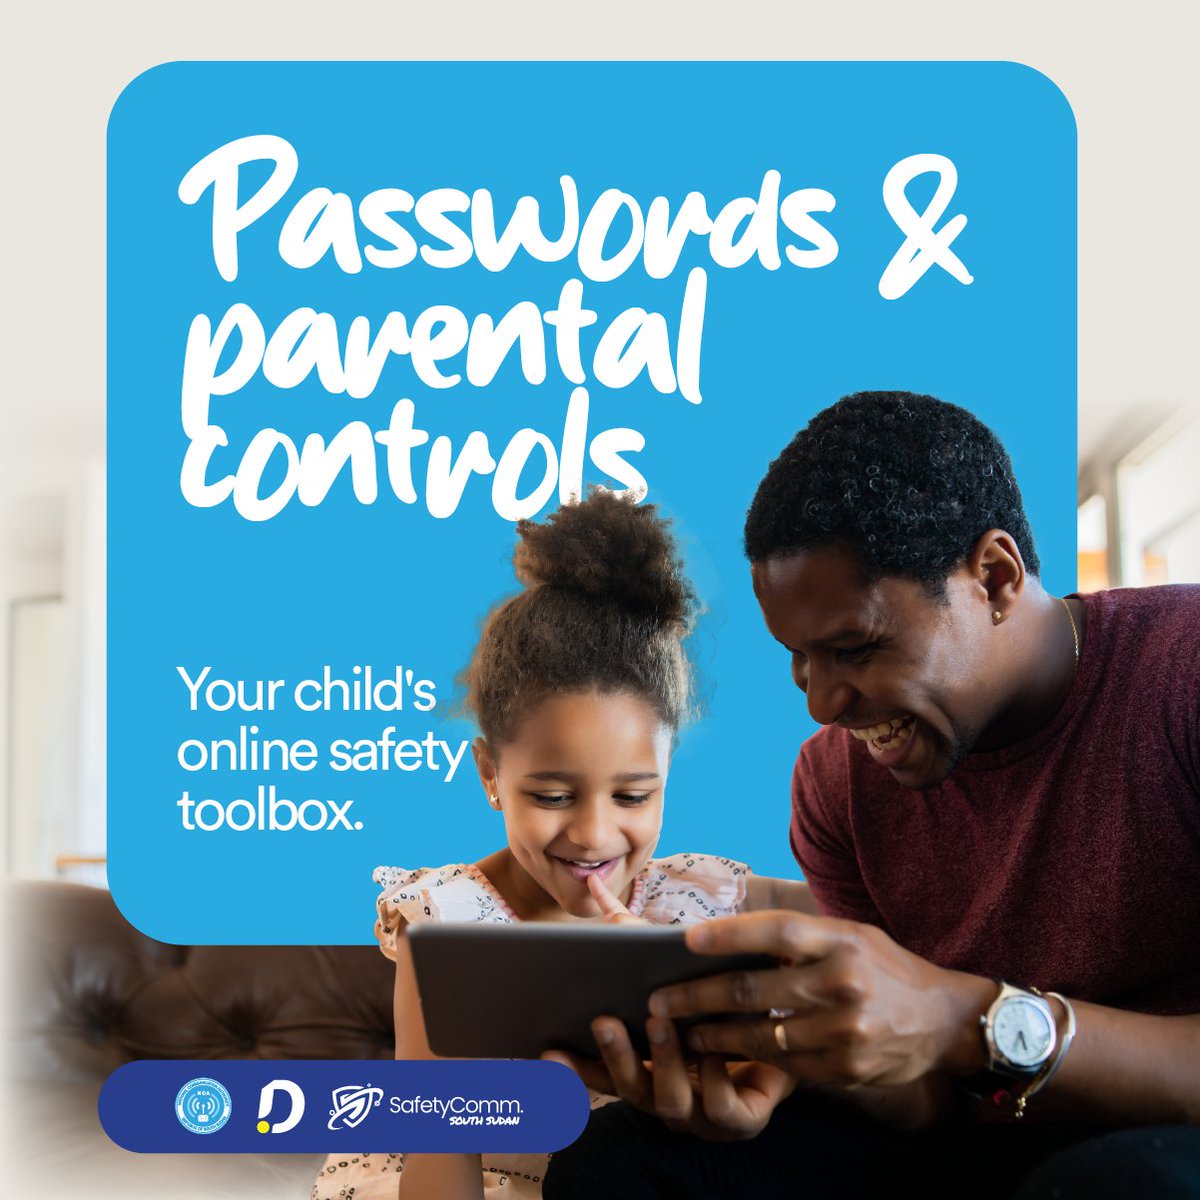 The kids may love new apps, but let's keep them safe! 

Before they download, research privacy policies, check age restrictions, & set parental controls.

SafetyComm's got your back with resources: safetycomm.org/ensuring-child…

#BeLikeTManager #OnlineChildProtection